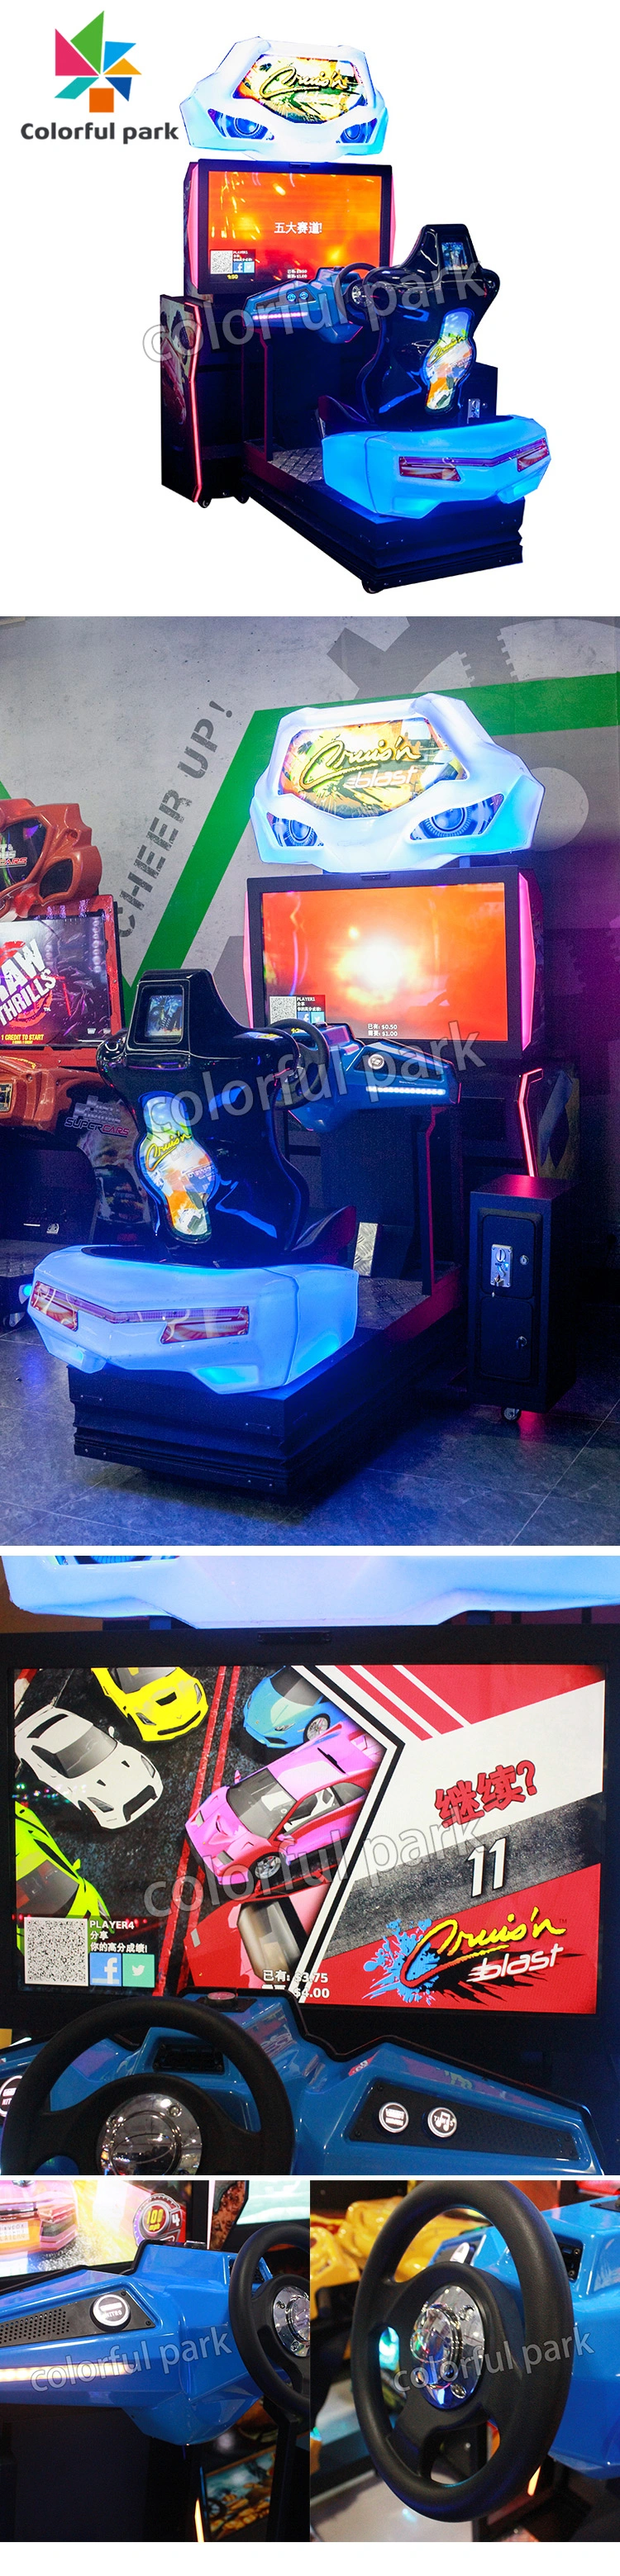 Colorful Park Game Machine for Game Center Arcade Video Game Machine Coin Operated Arcade Game Machine